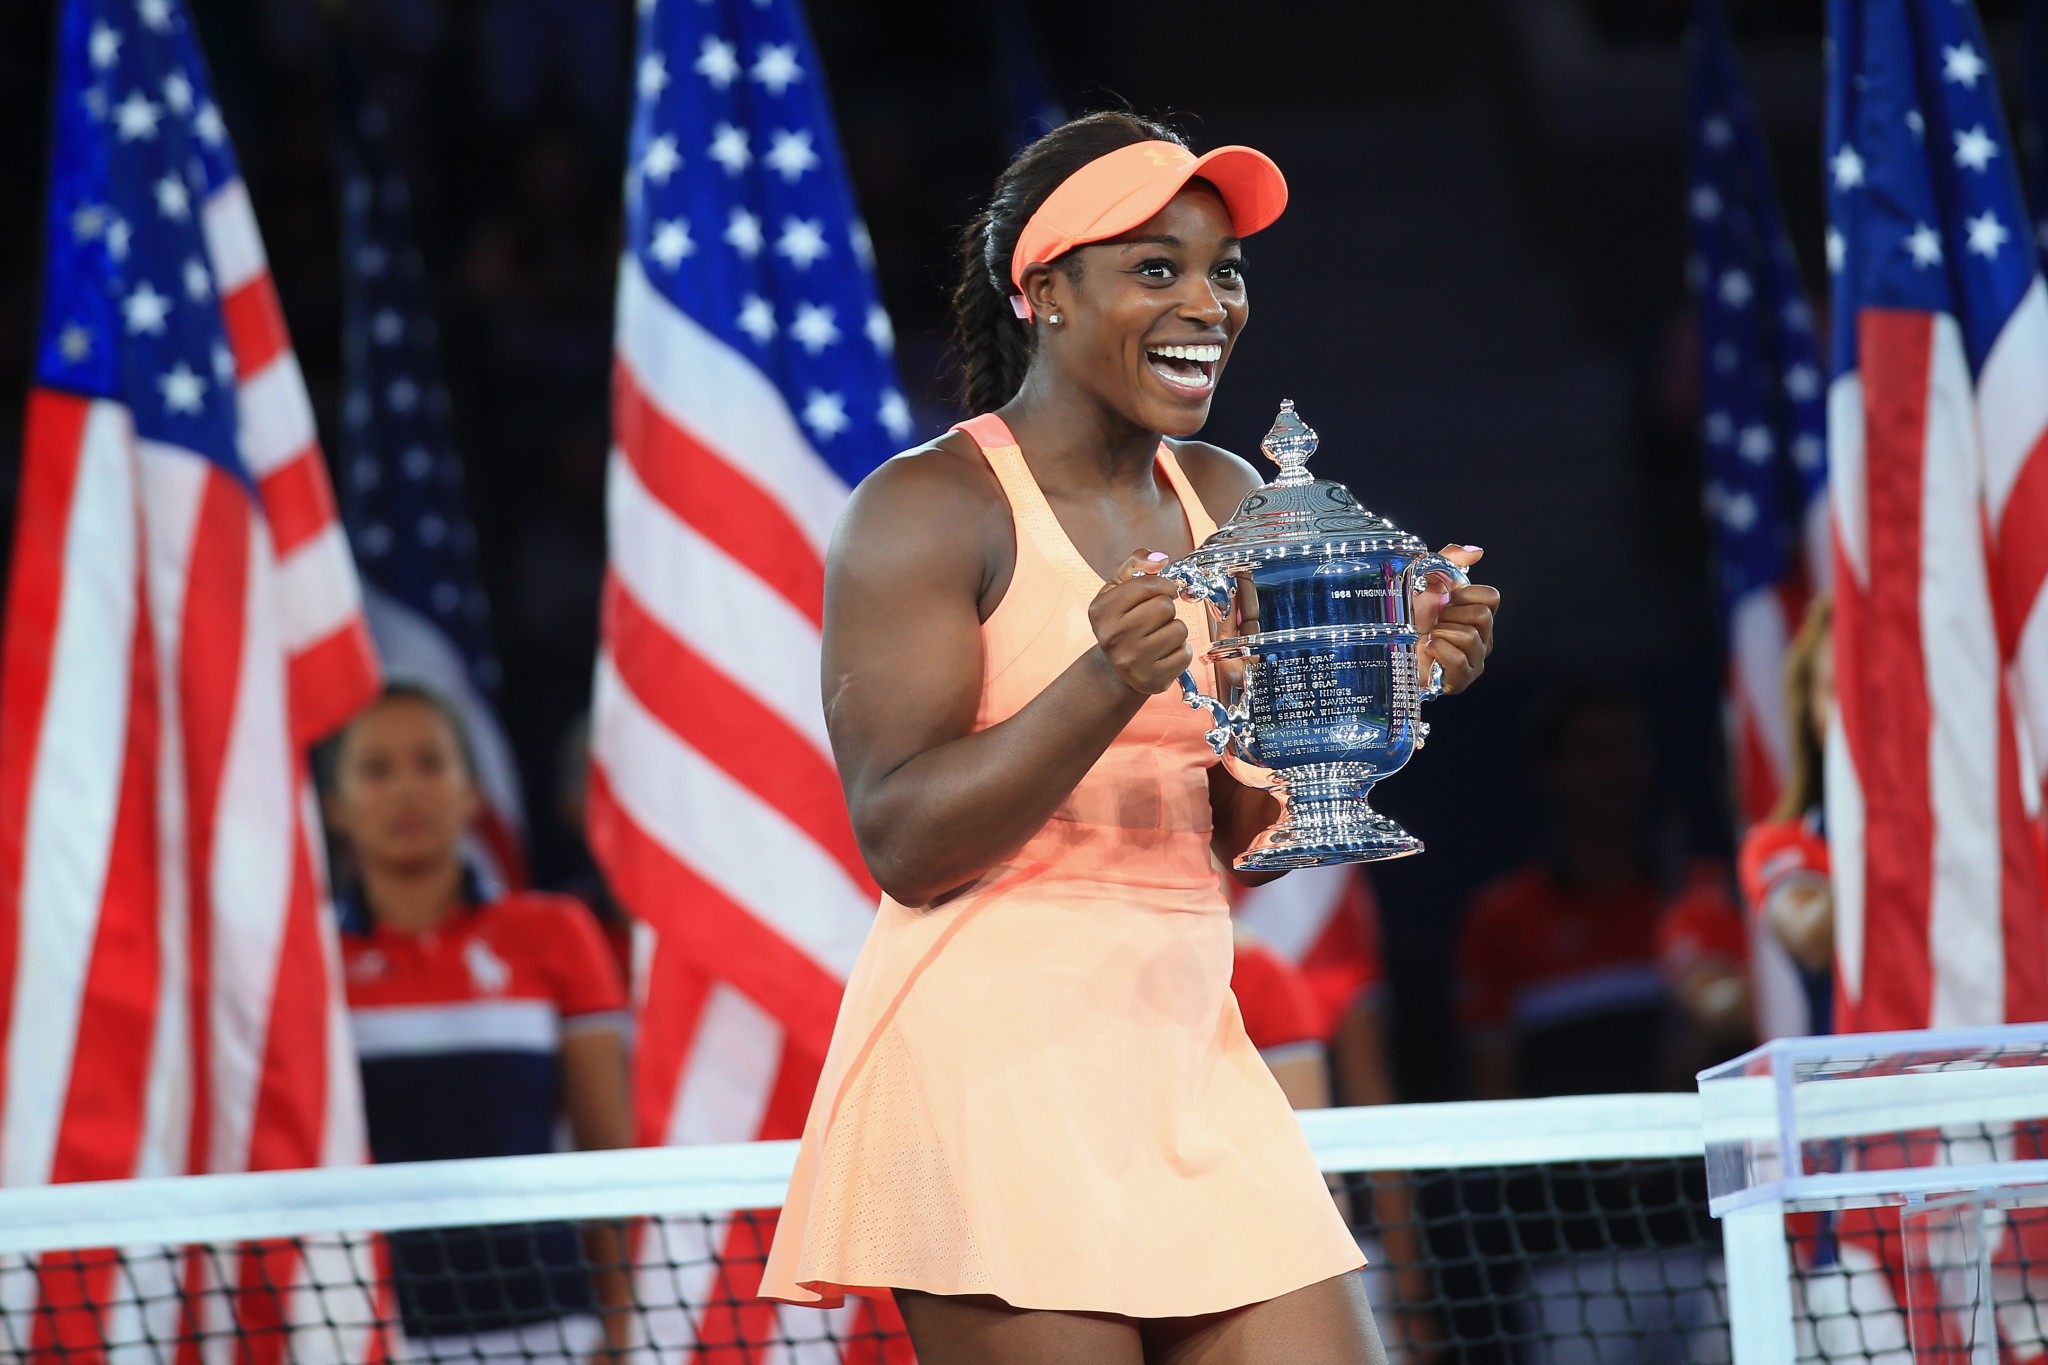 Stephens eases past compatriot Keys to win US Open title